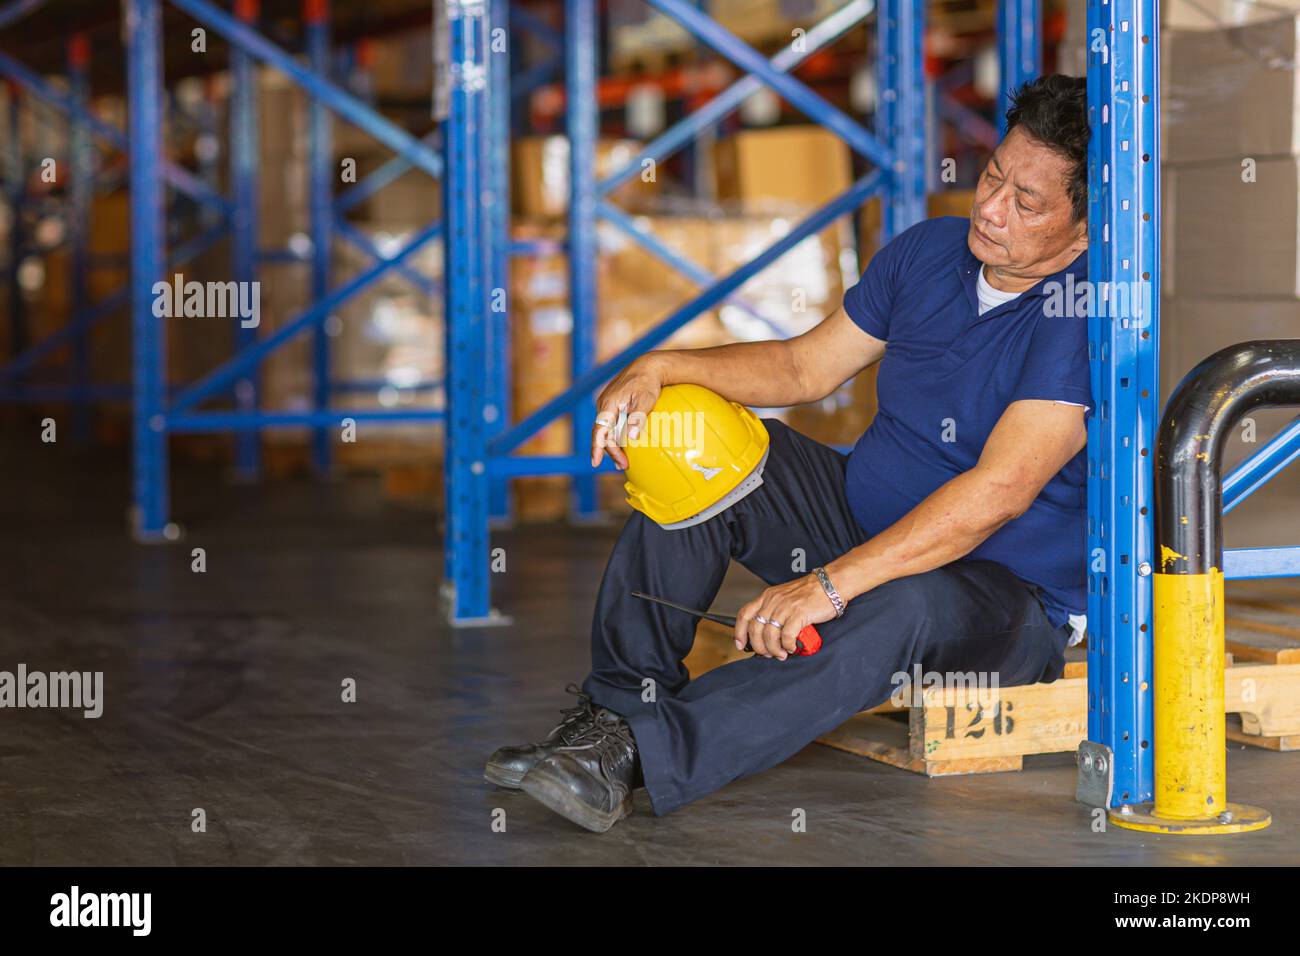 fatigue senior adult worker napping sleep at work exhausted. warehouse industry employee sleeping tired from hard working. Stock Photo